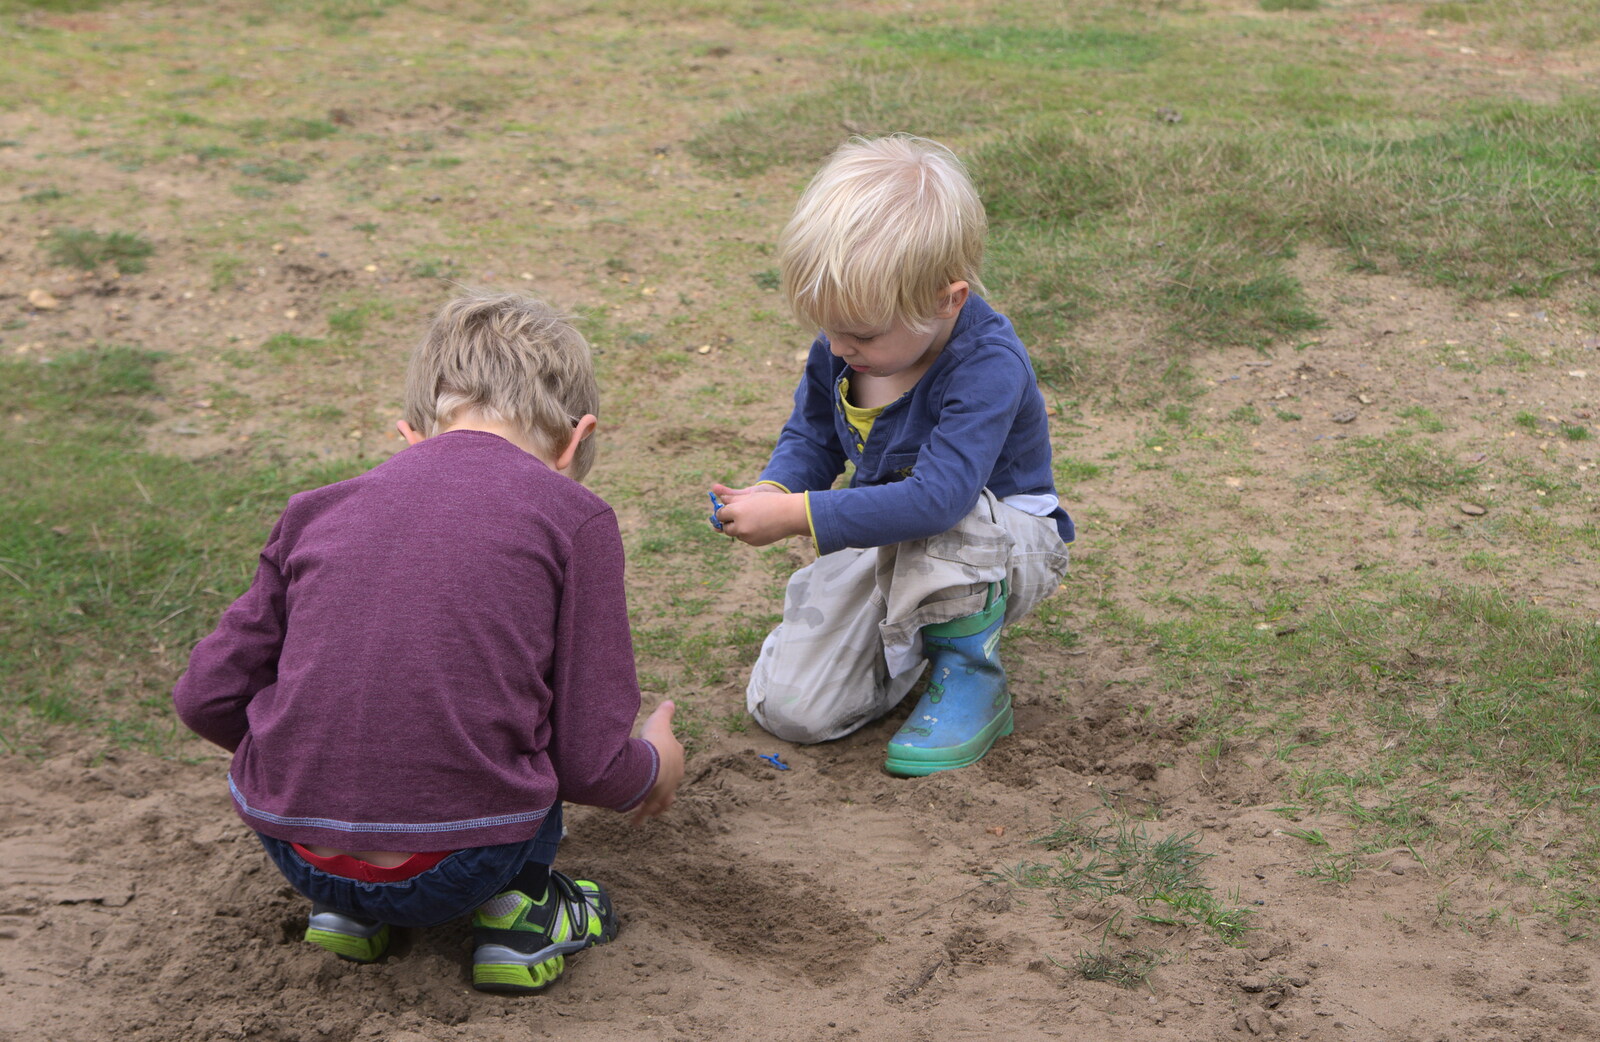 The boys dig in the dirt from A Walk on Wortham Ling, Diss, Norfolk - 30th October 2014